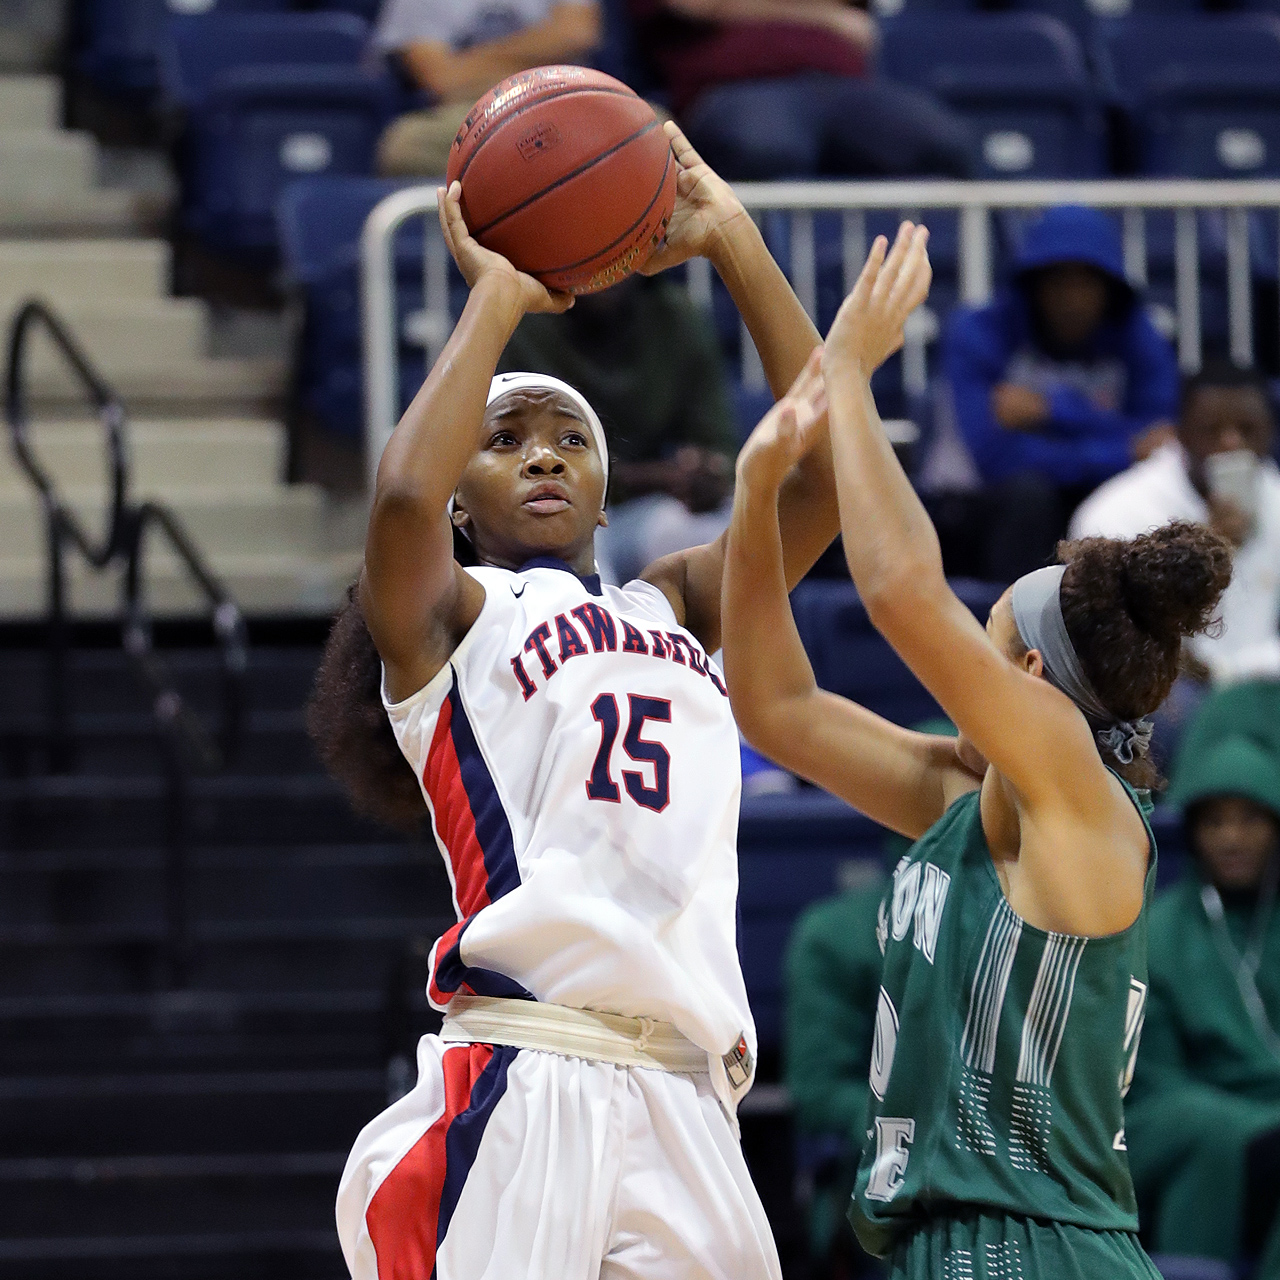 Lady Indians' rally comes up short at Gadsden State